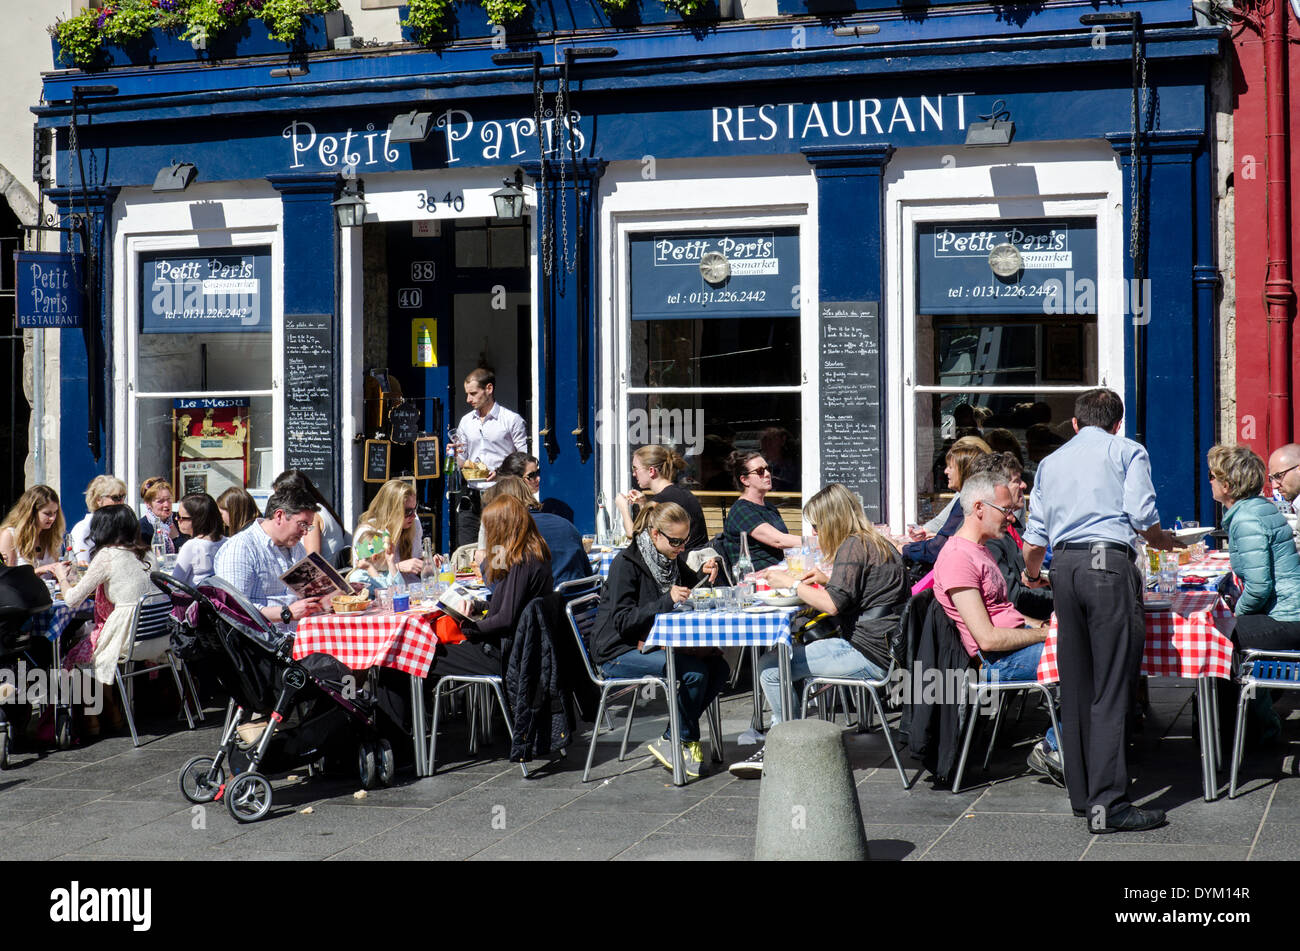 Diners eating outside the "Petit Paris" French restaurant in the